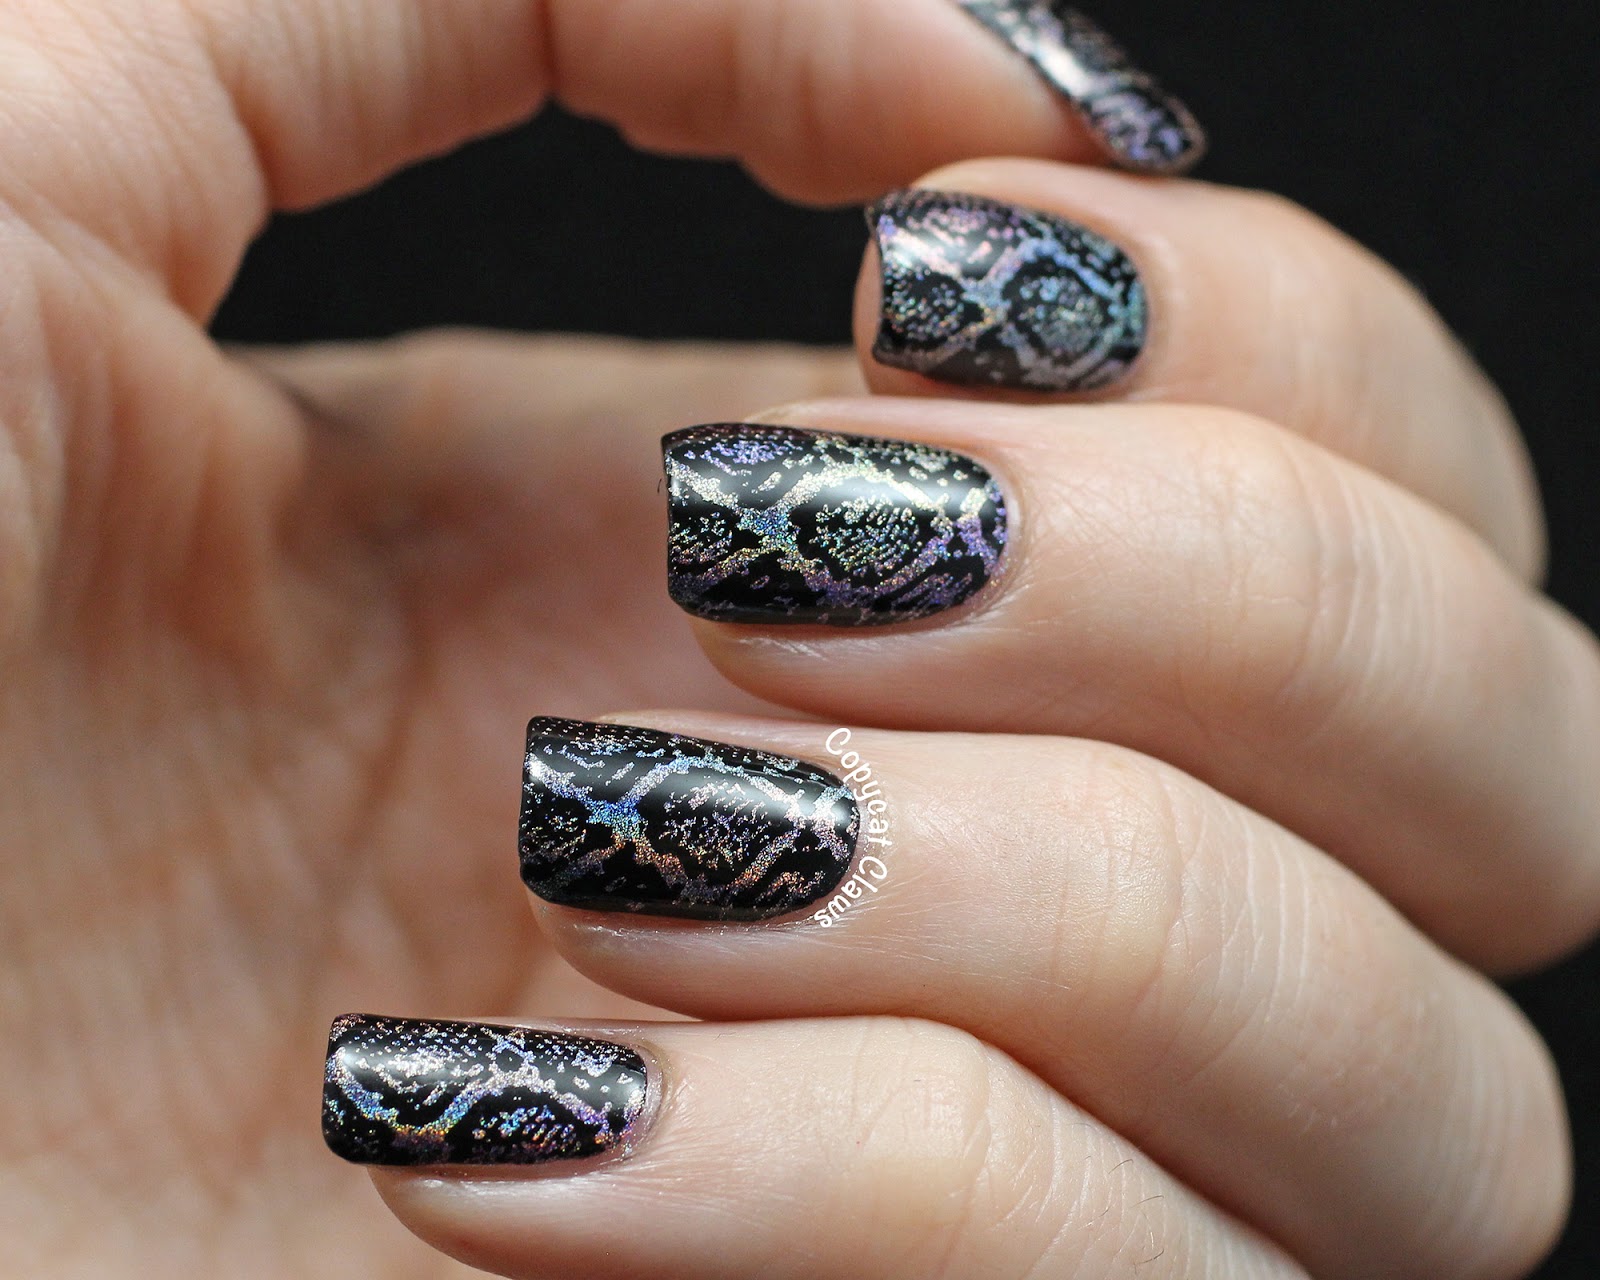 1. How to Create a Snakeskin Pattern Nail Art Design Tutorial - wide 5